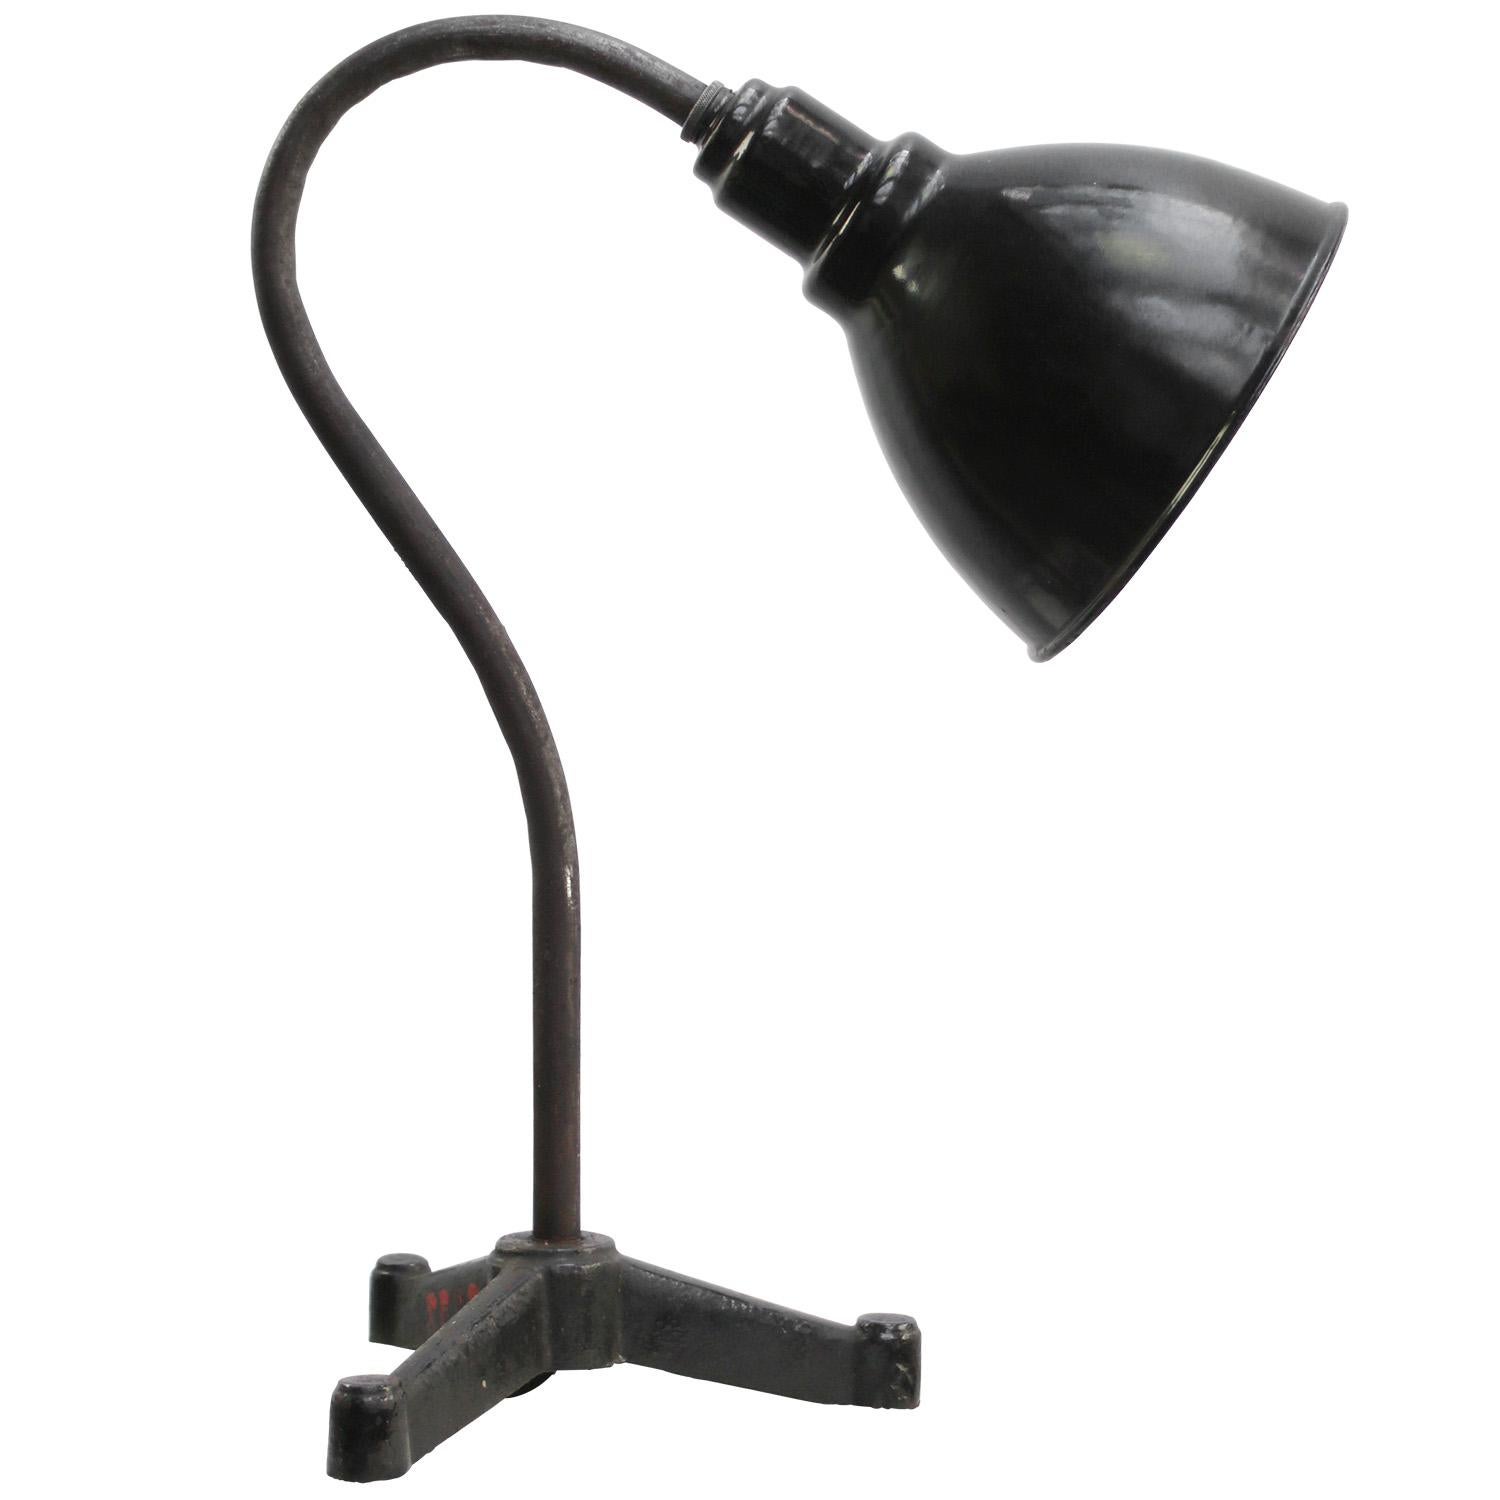 Black enamel desk light 1920
2,5 meter black cotton flex, plug and switch

Also available with US/UK plug

Weight: 2.50 kg / 5.5 lb

Priced per individual item. All lamps have been made suitable by international standards for incandescent light